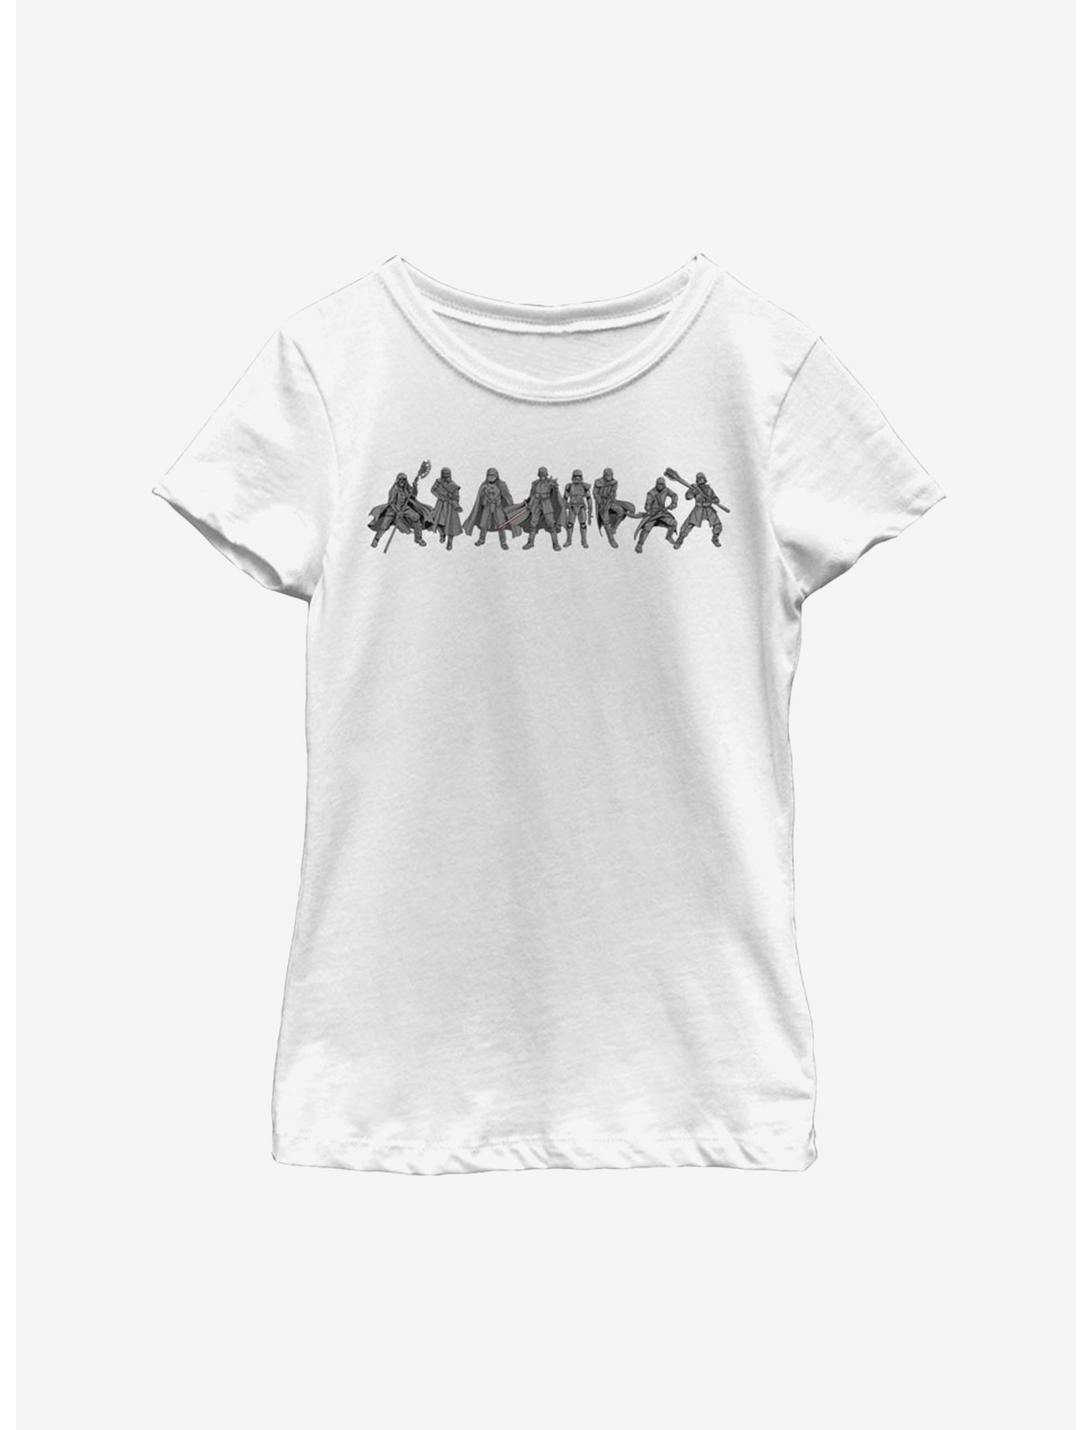 Star Wars Episode IX The Rise Of Skywalker New Order Lineup Youth Girls T-Shirt, WHITE, hi-res